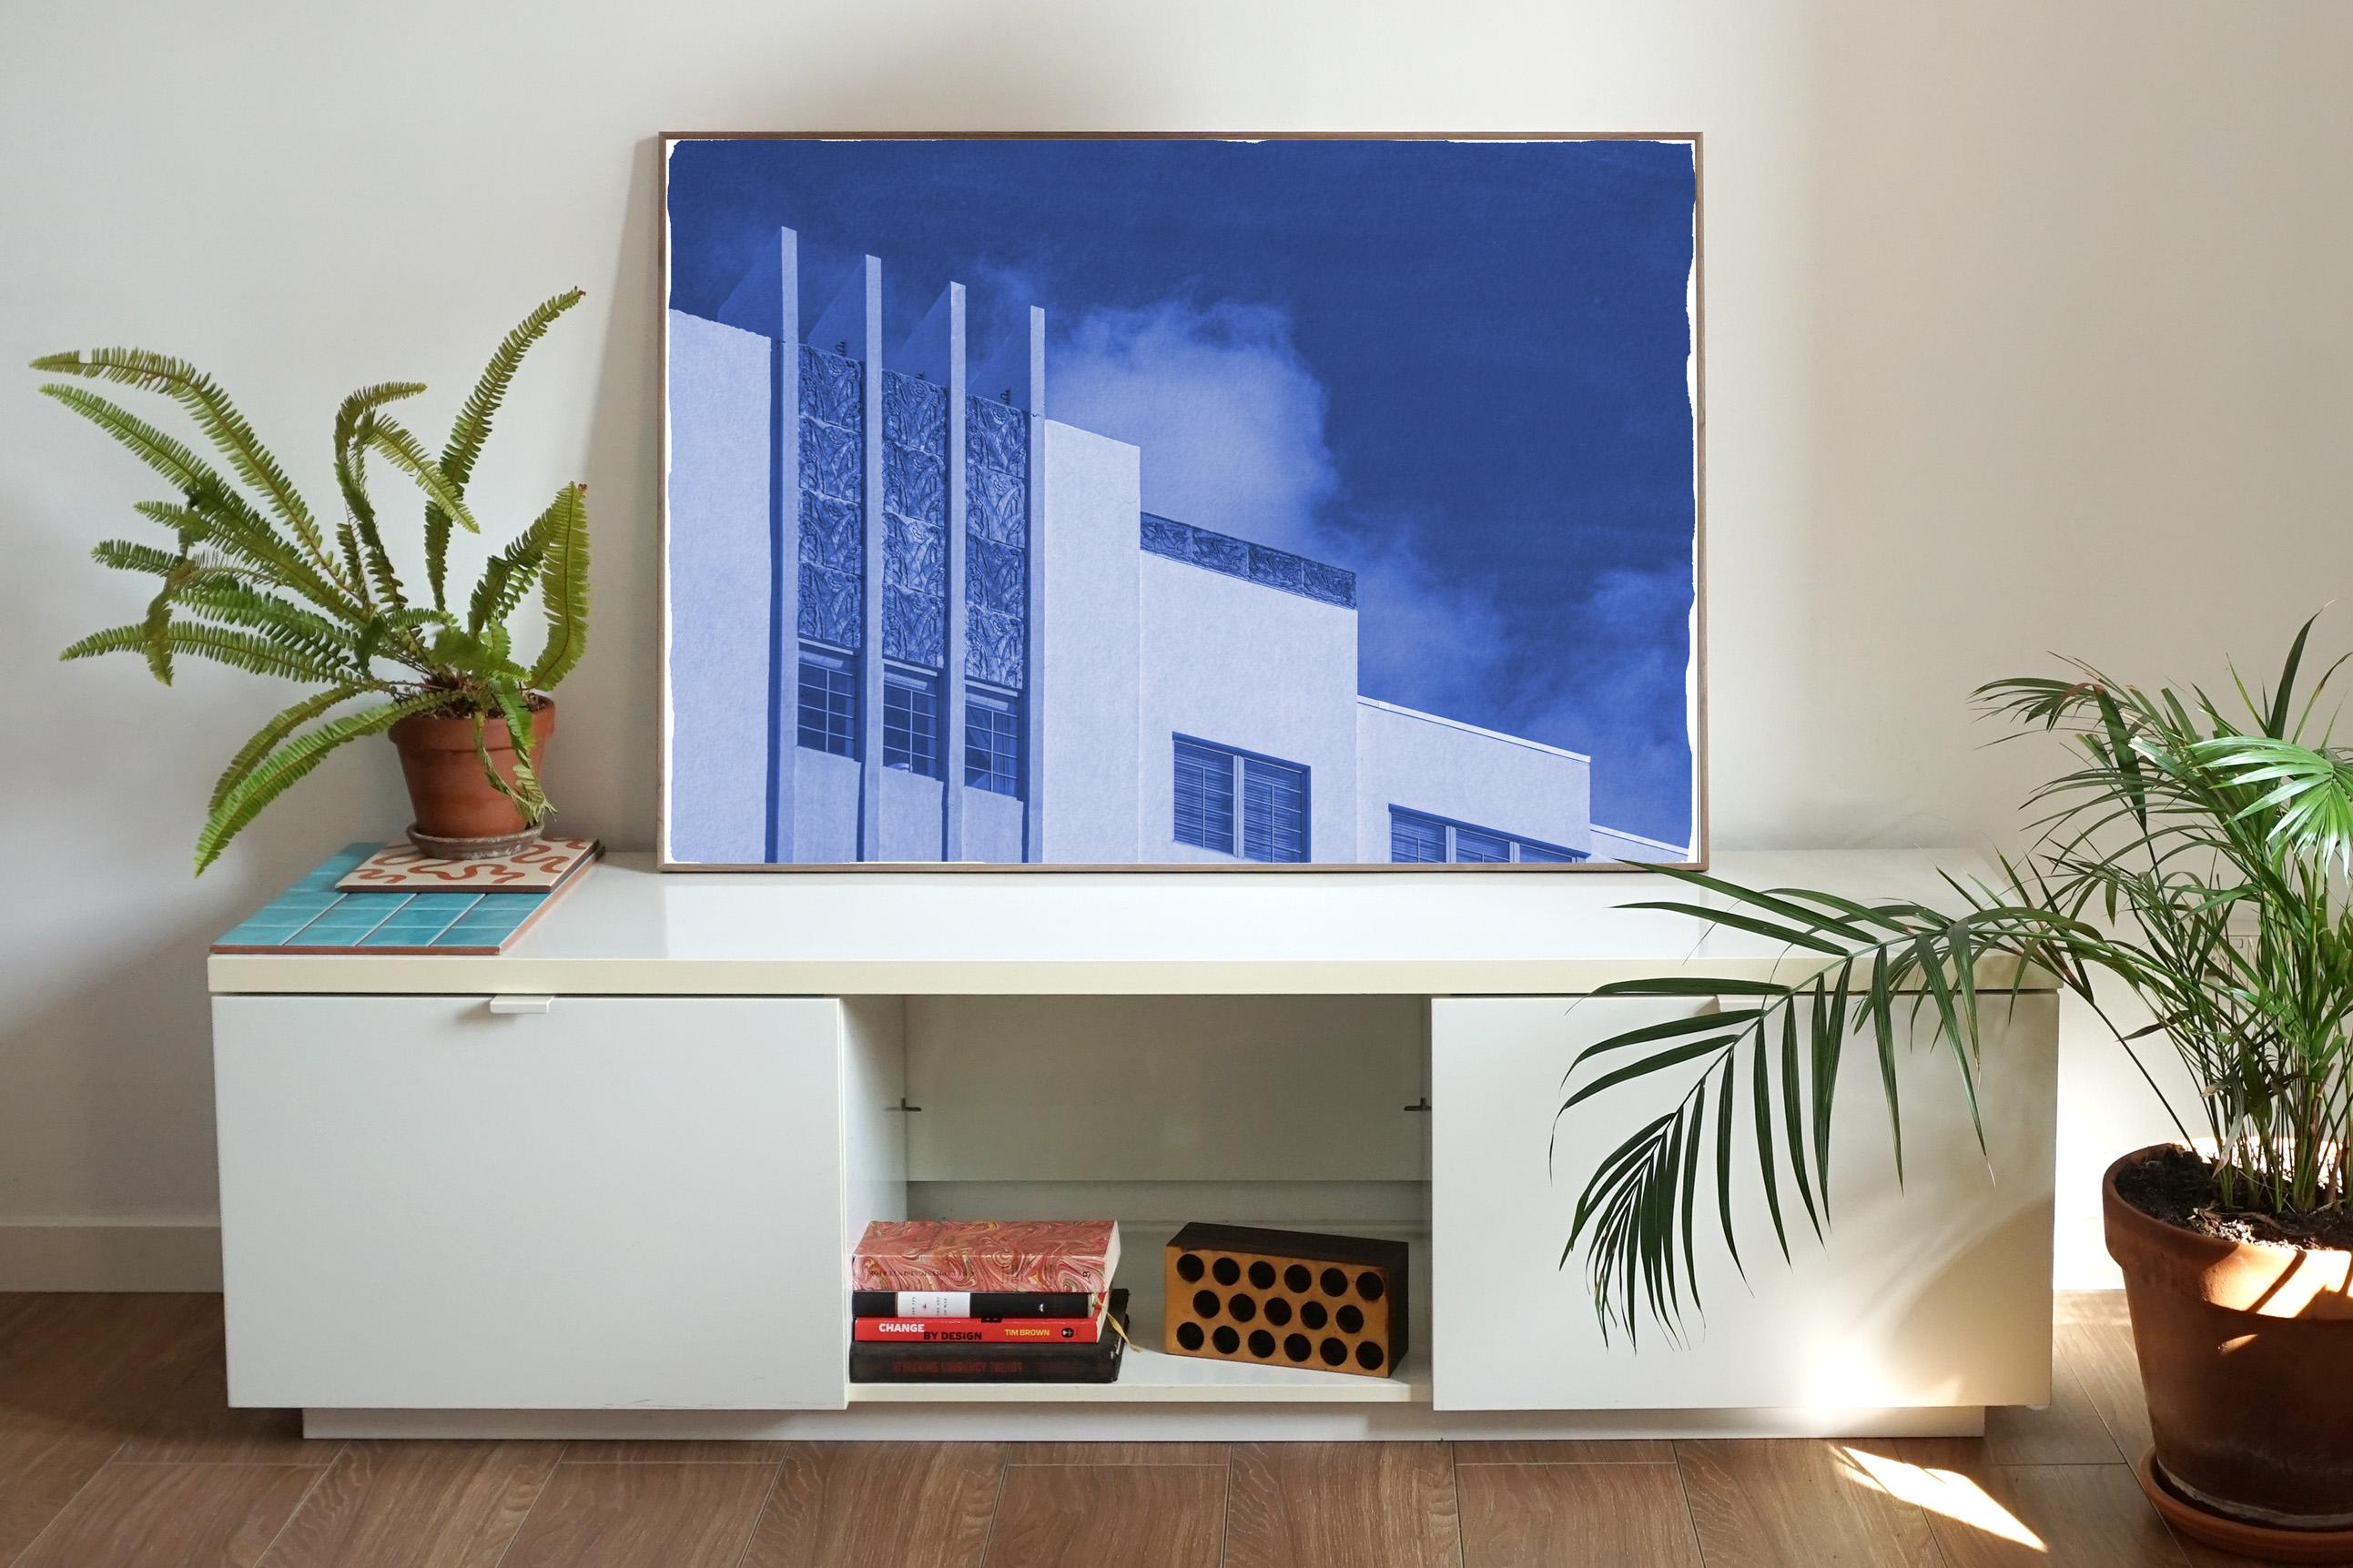 This is an exclusive handprinted limited edition cyanotype. 
This beautiful cyanotype portrays an iconic building facade from the thirties. 

Details:
+ Title: Thirties Building with Sky
+ Year: 2021
+ Edition Size: 100
+ Stamped and Certificate of